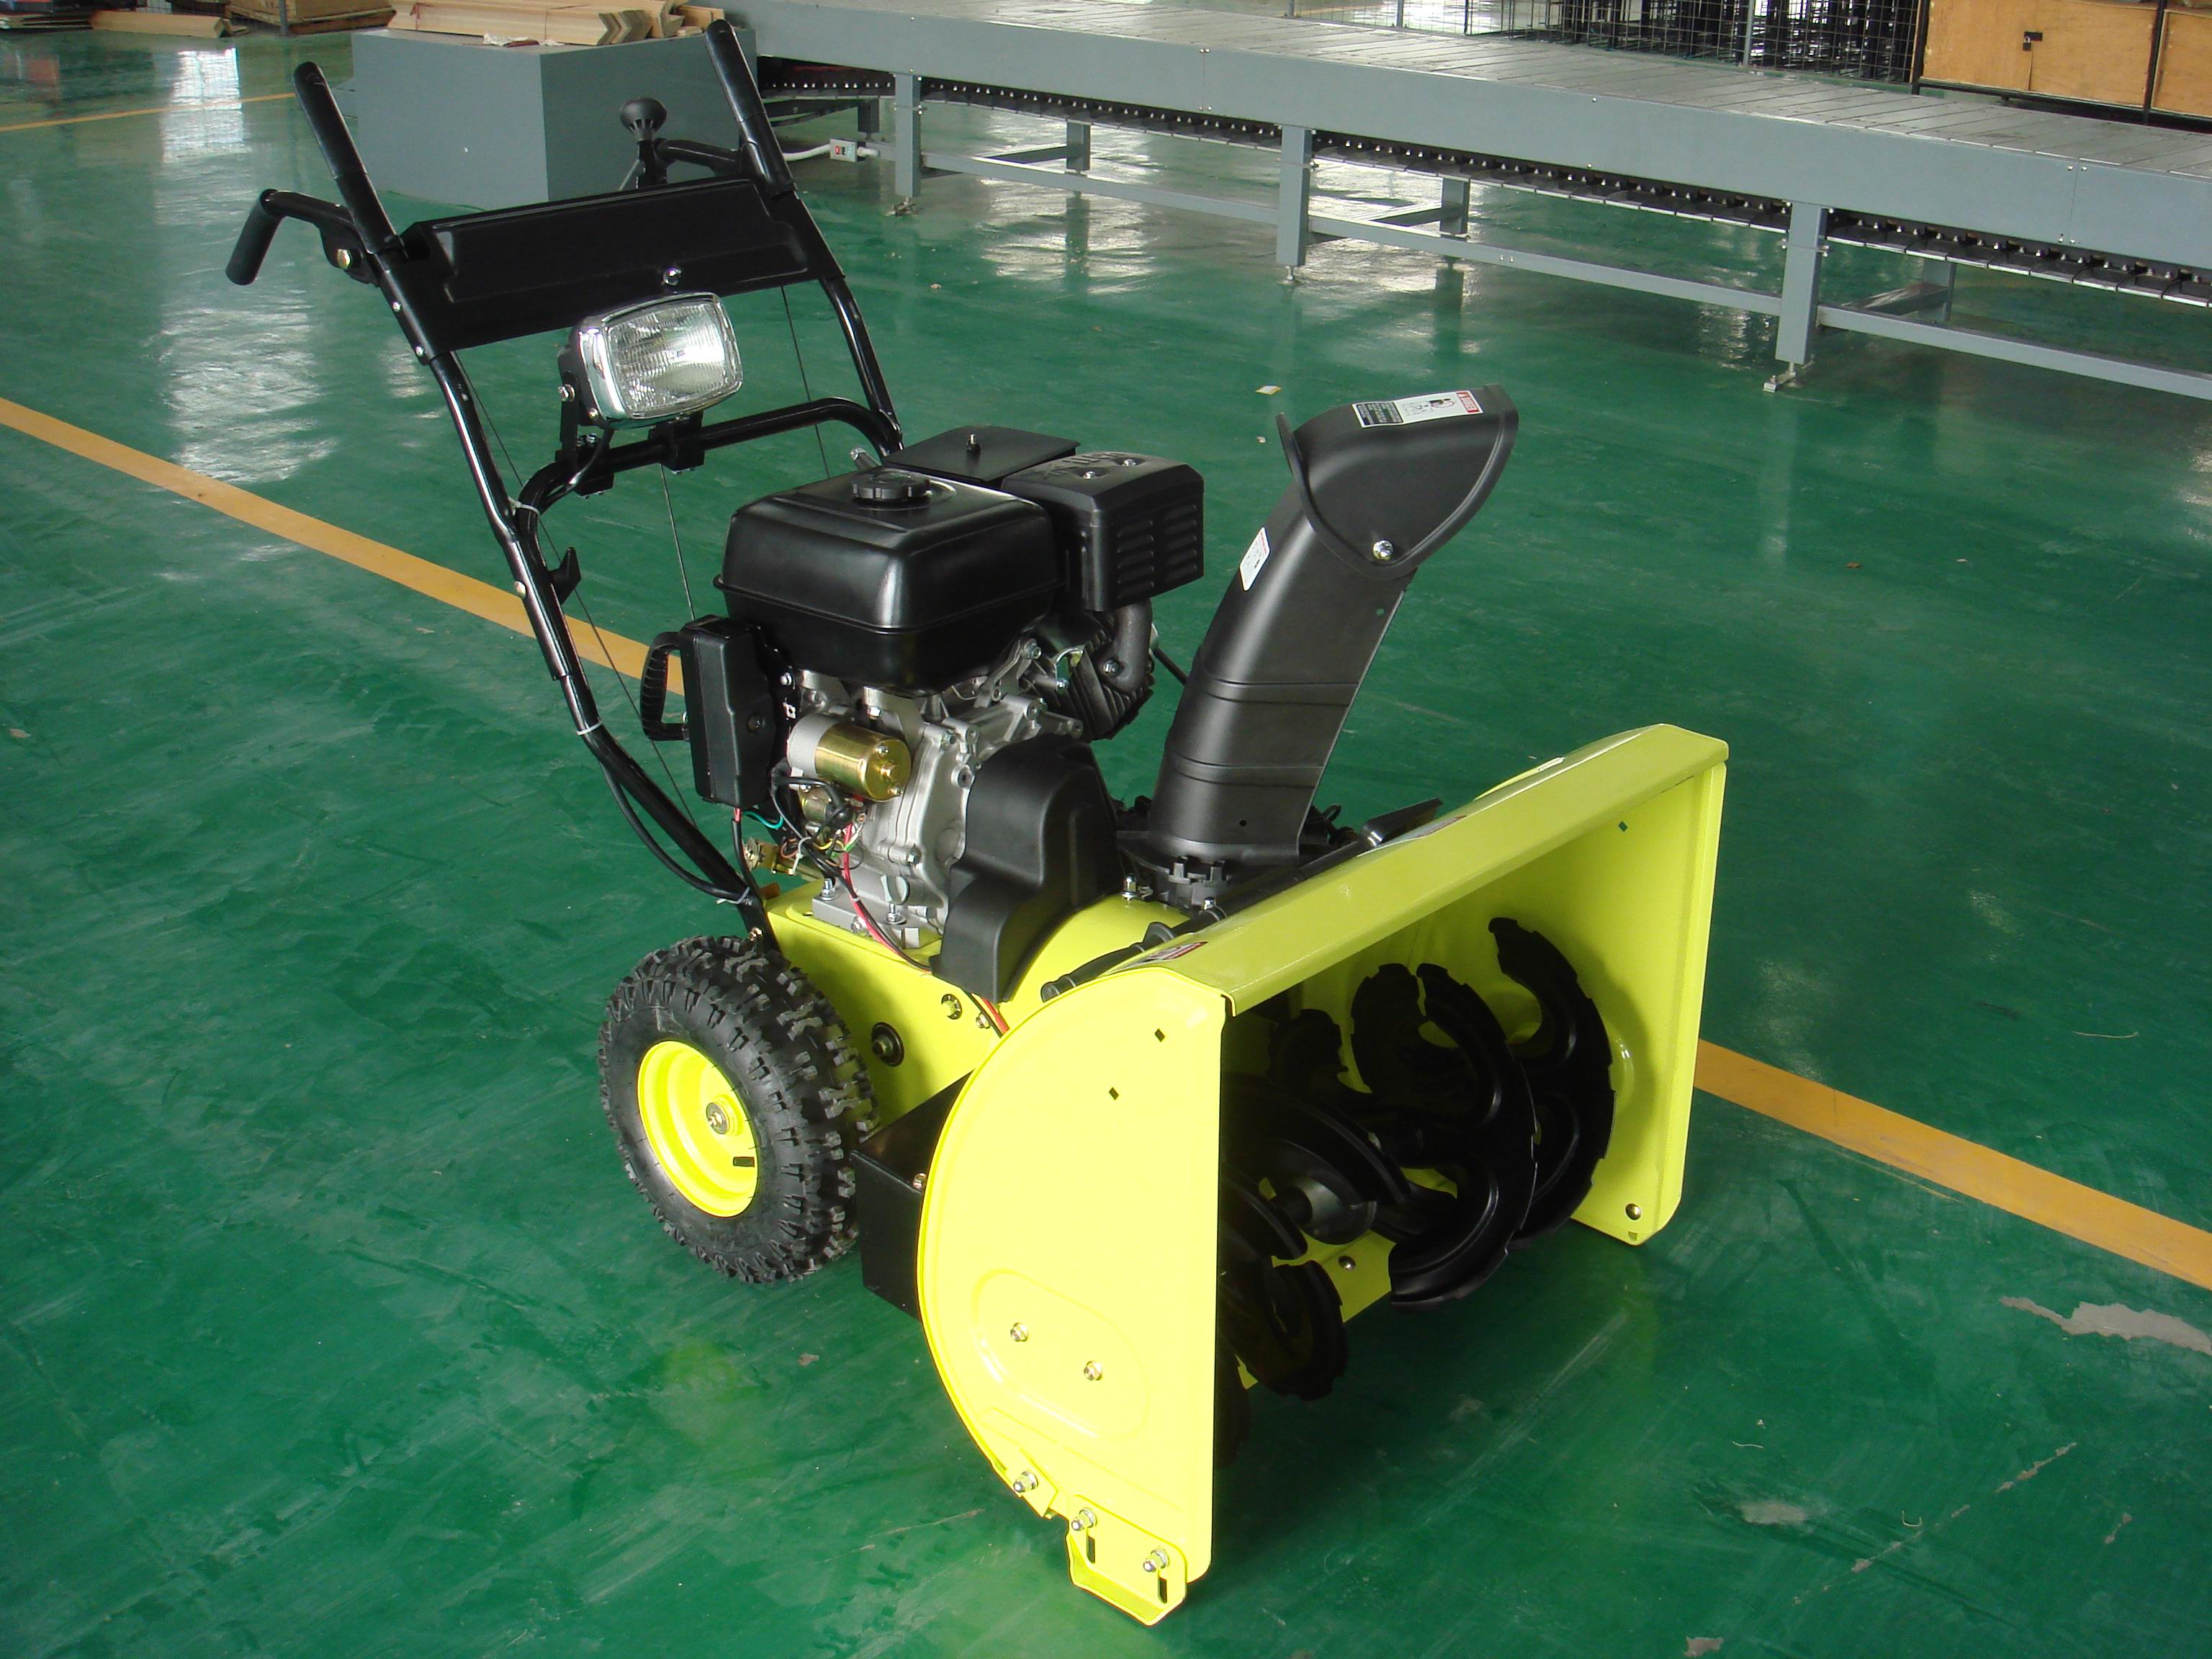 High quality snowblower at very competitive price